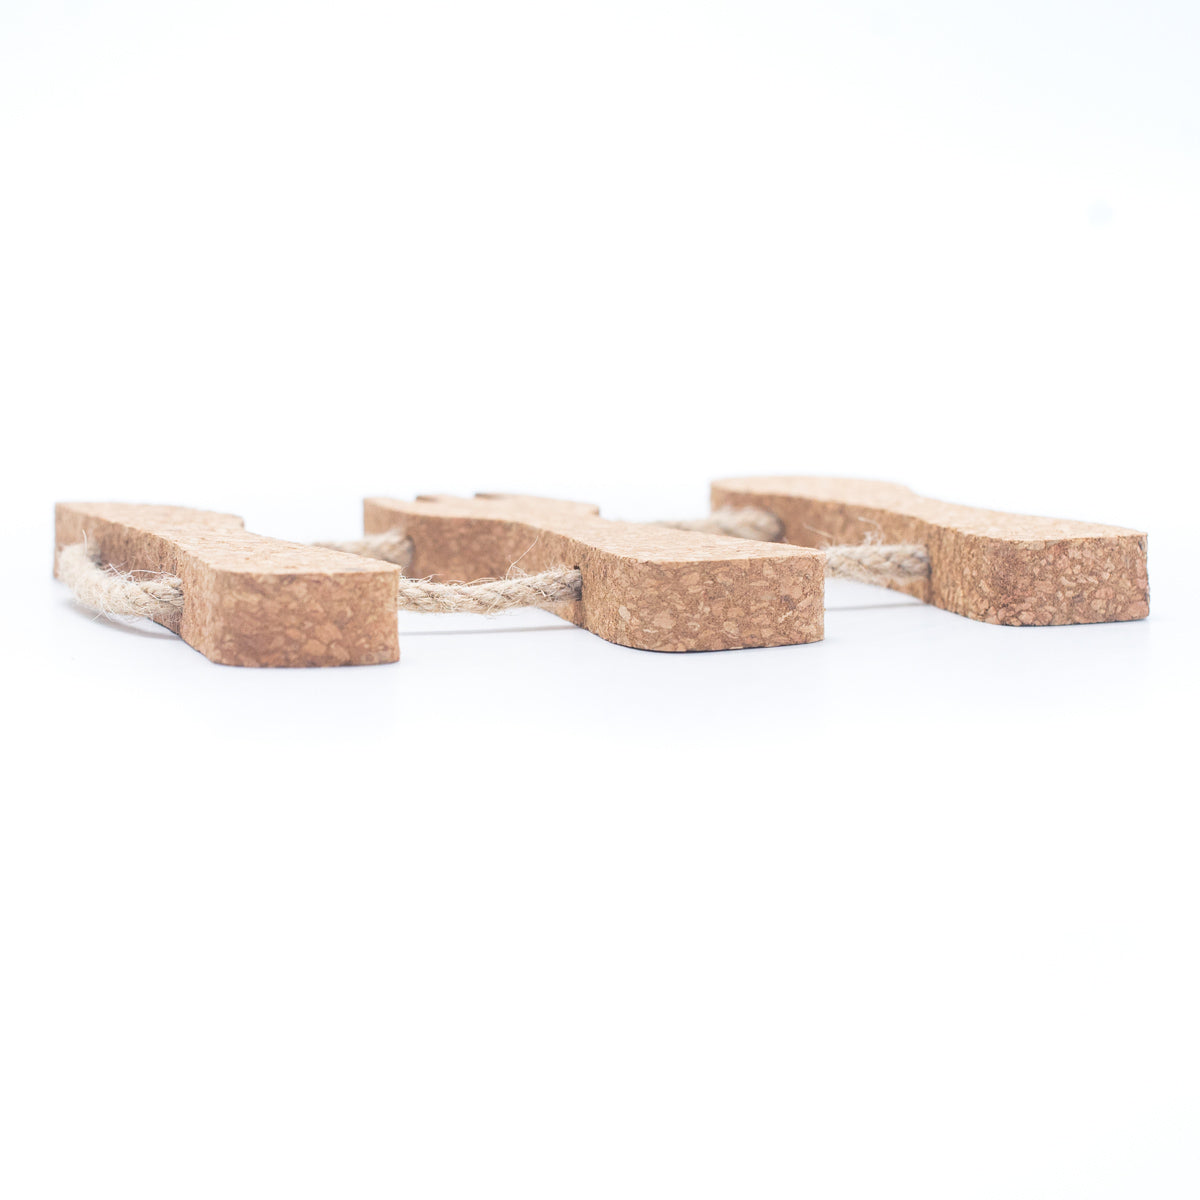  Natural Cork Coasters | THE CORK COLLECTION 